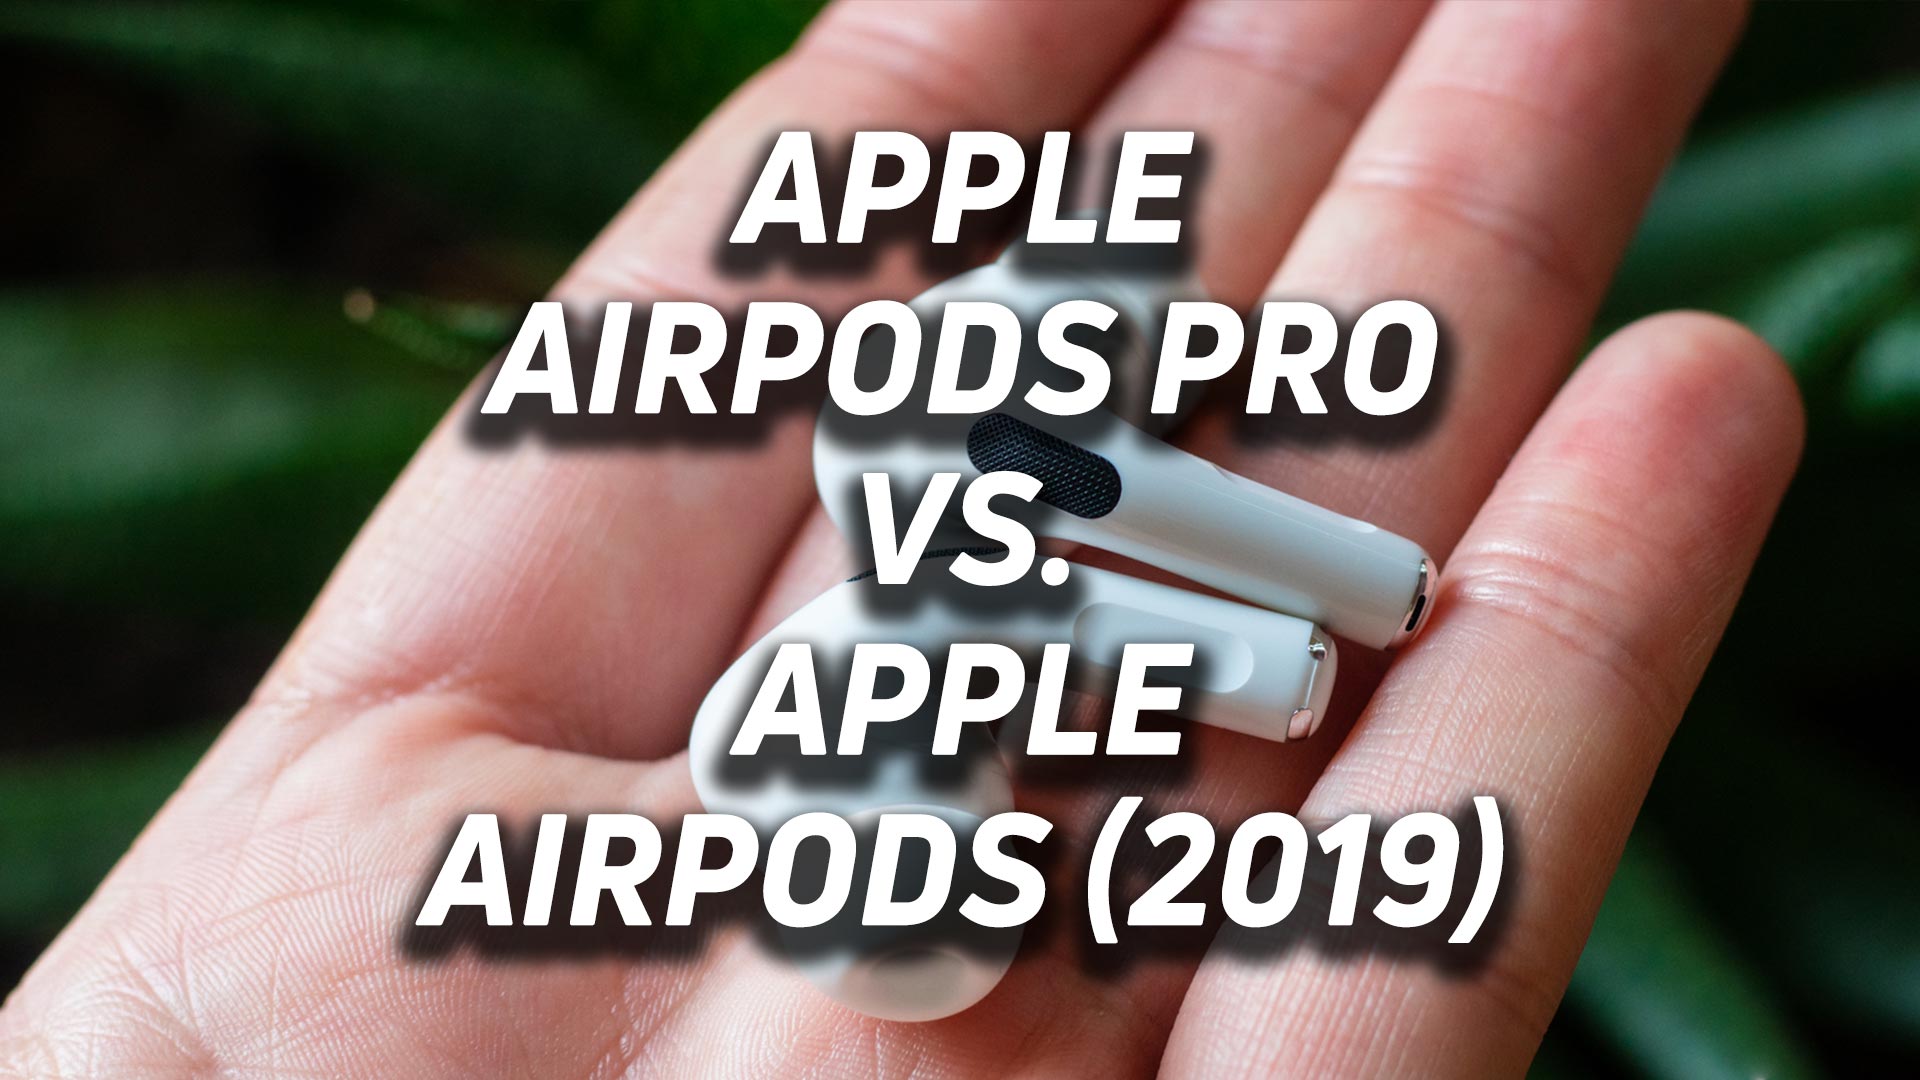 A picture of the Apple AirPods Por in a man's left hand against a green background with the text "Apple AirPods Pro vs. Apple AirPods" overlaid.